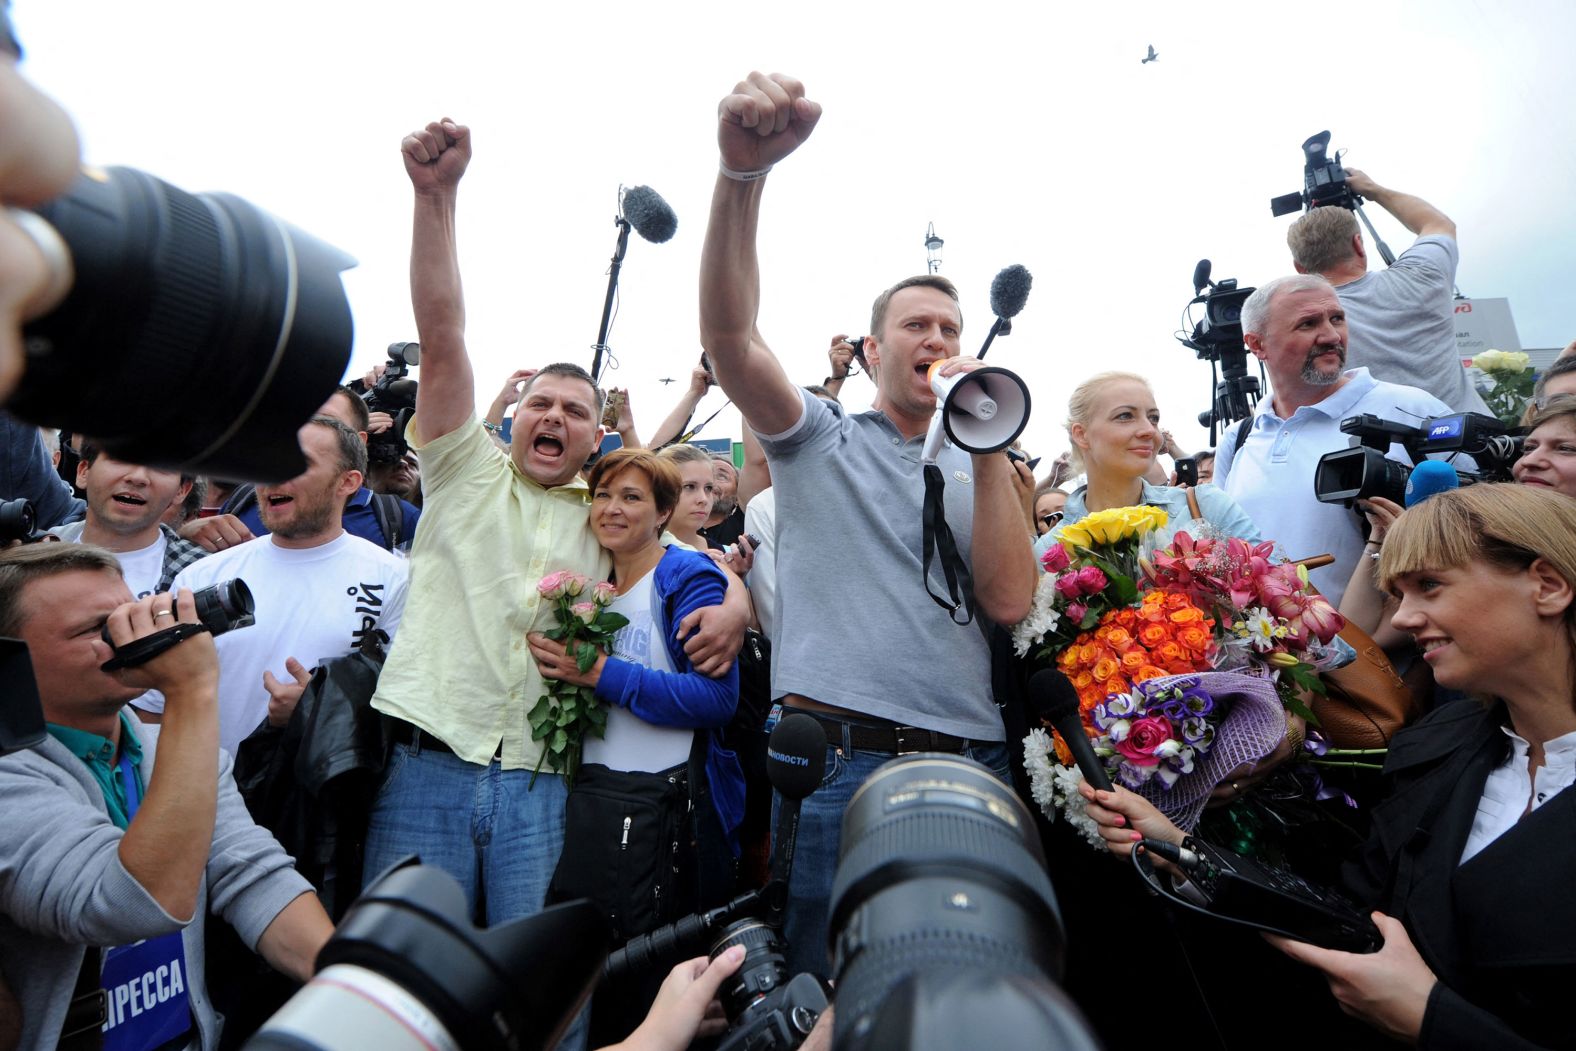 Navalny and Ofitserov, center left, address supporters at a railway station in Moscow in July 2013. Navalny said he would push ahead with his bid to become mayor of Moscow. He finished second in the race.